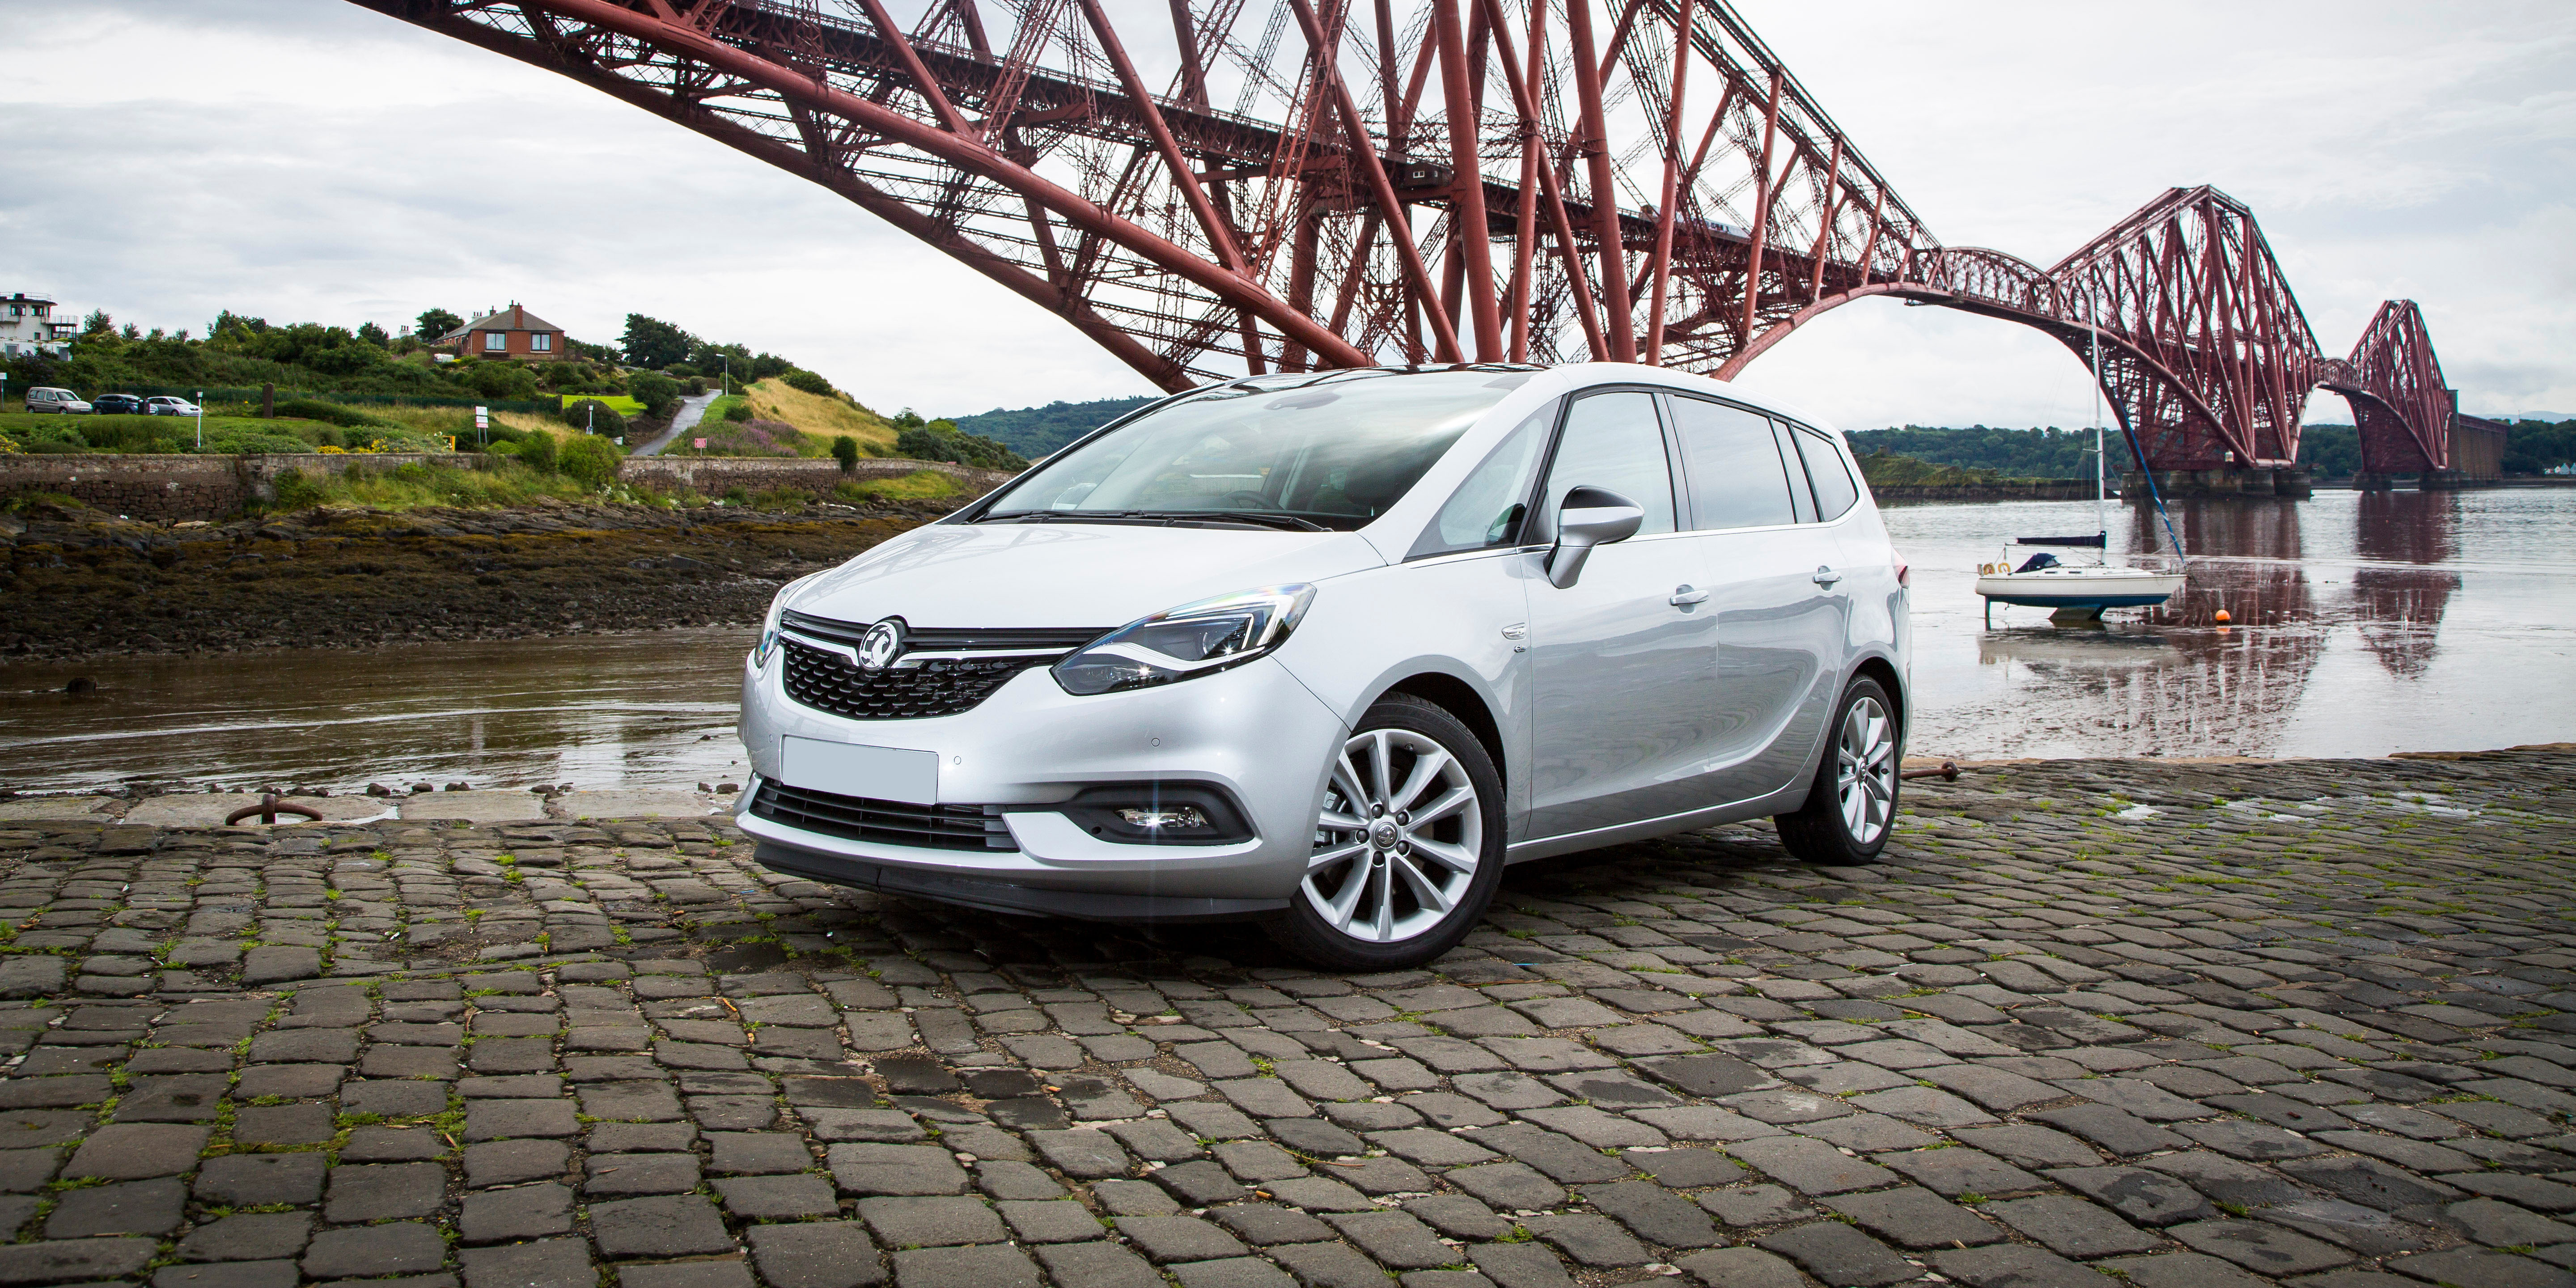 Find Opel Zafira Tourer c for sale - AutoScout24